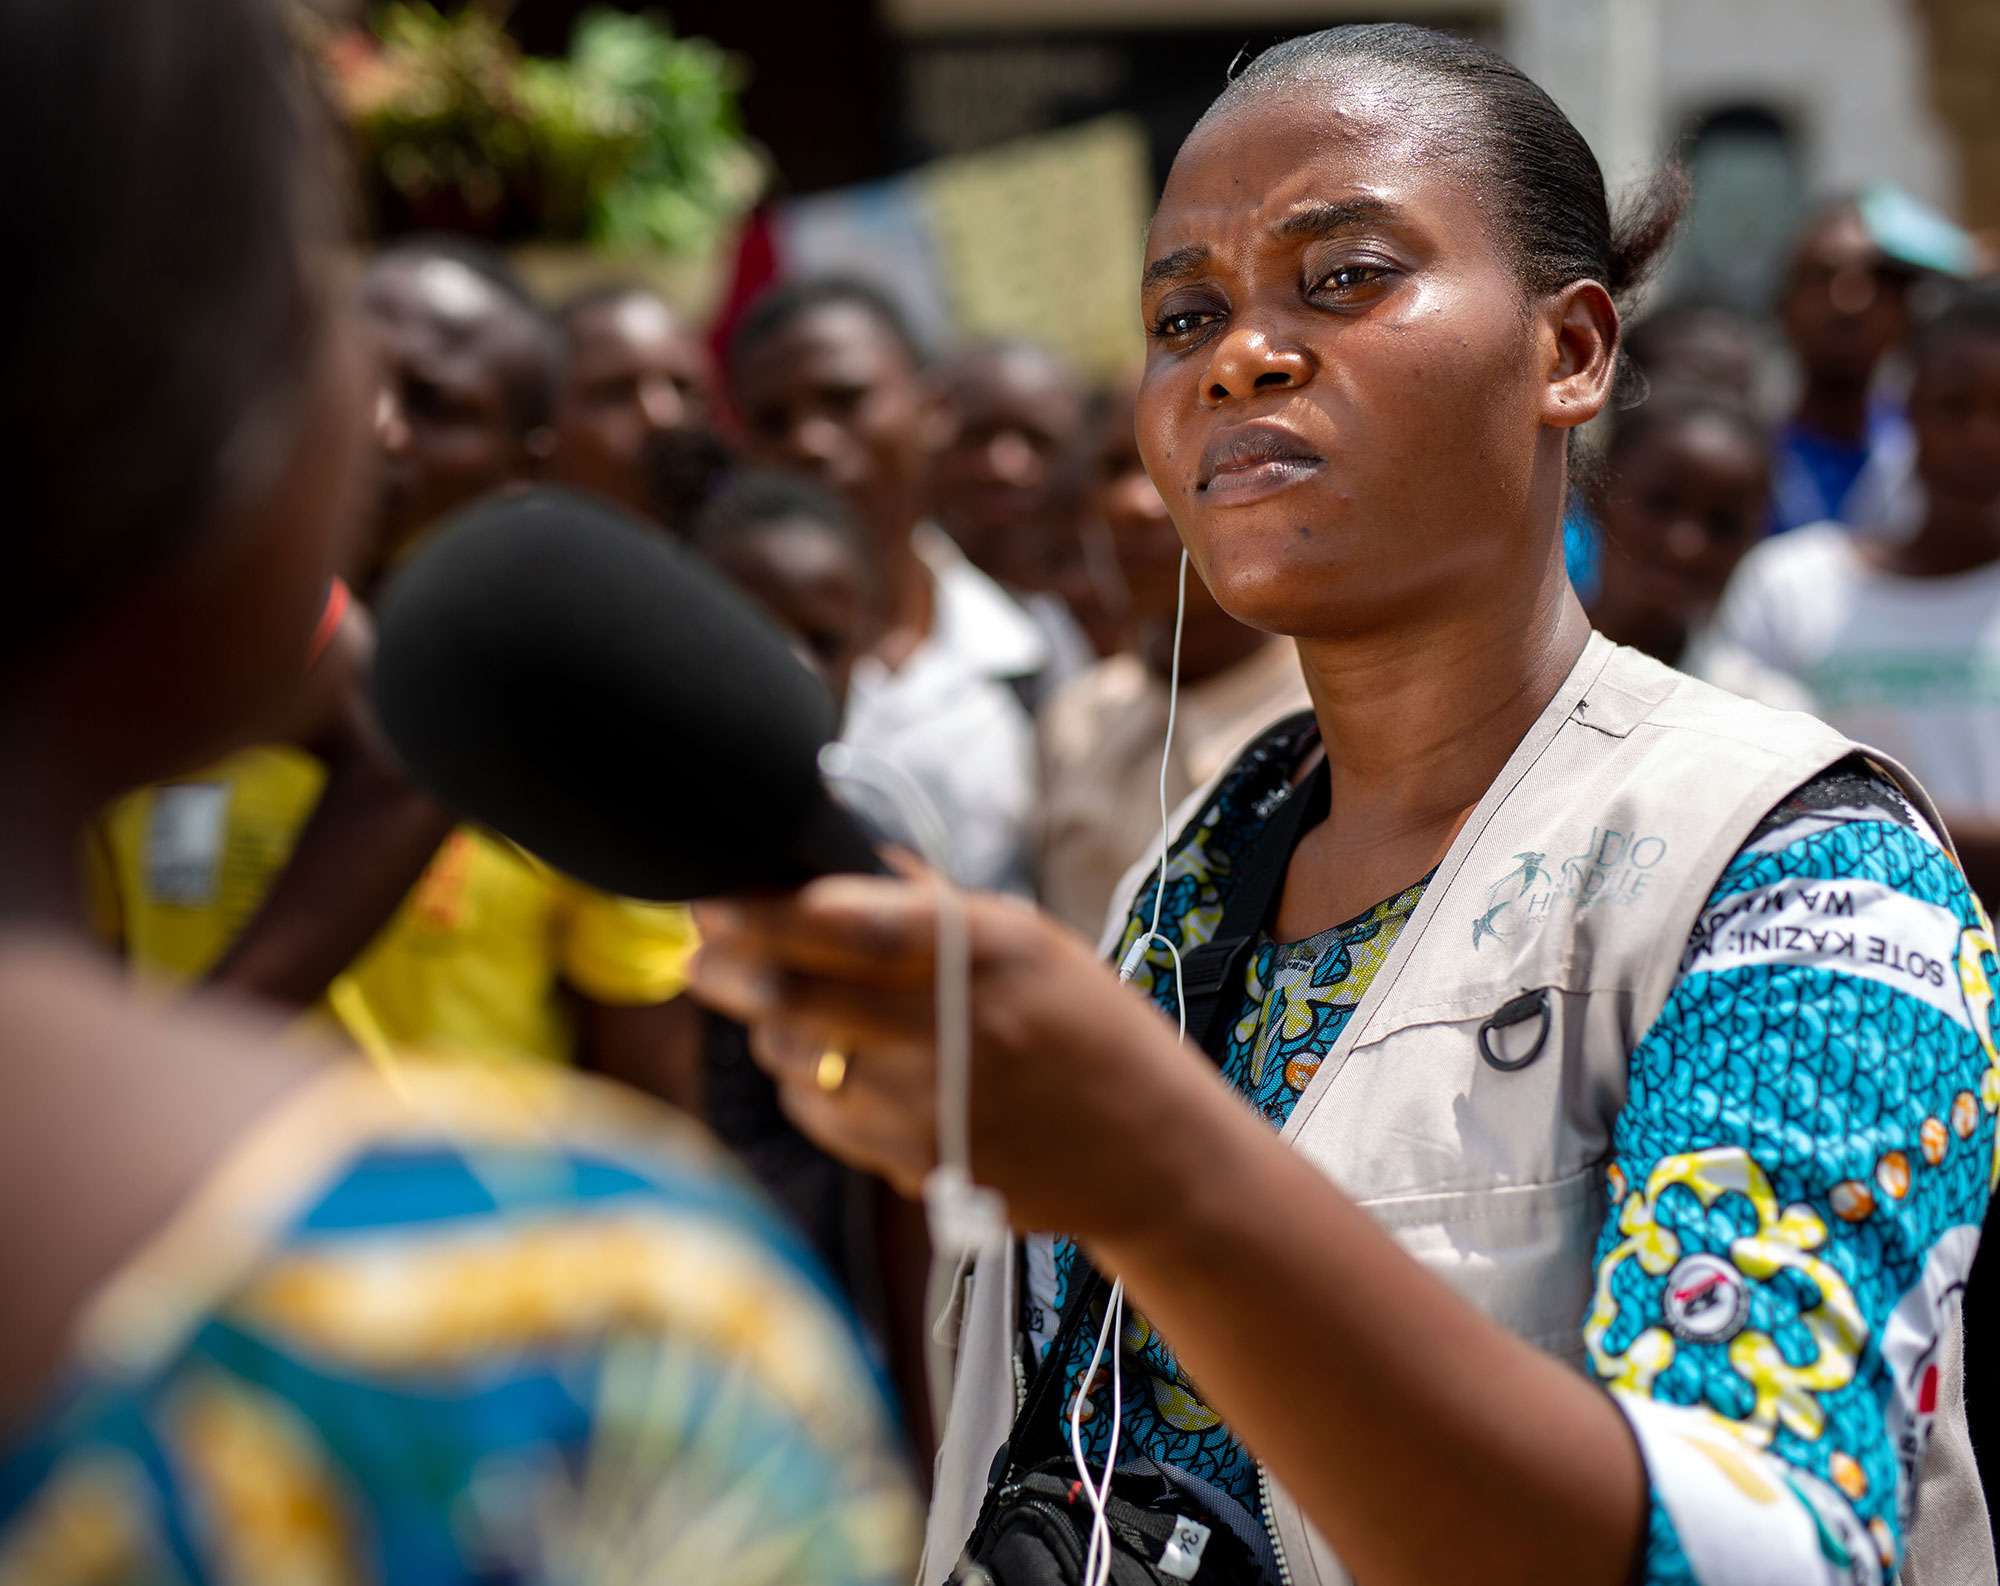 A journalist from Studio Hirondelle RDC reports from the Kasai region of the Democratic Republic of Congo. © Gwenn Dubourthoumieu / Fondation Hirondelle.